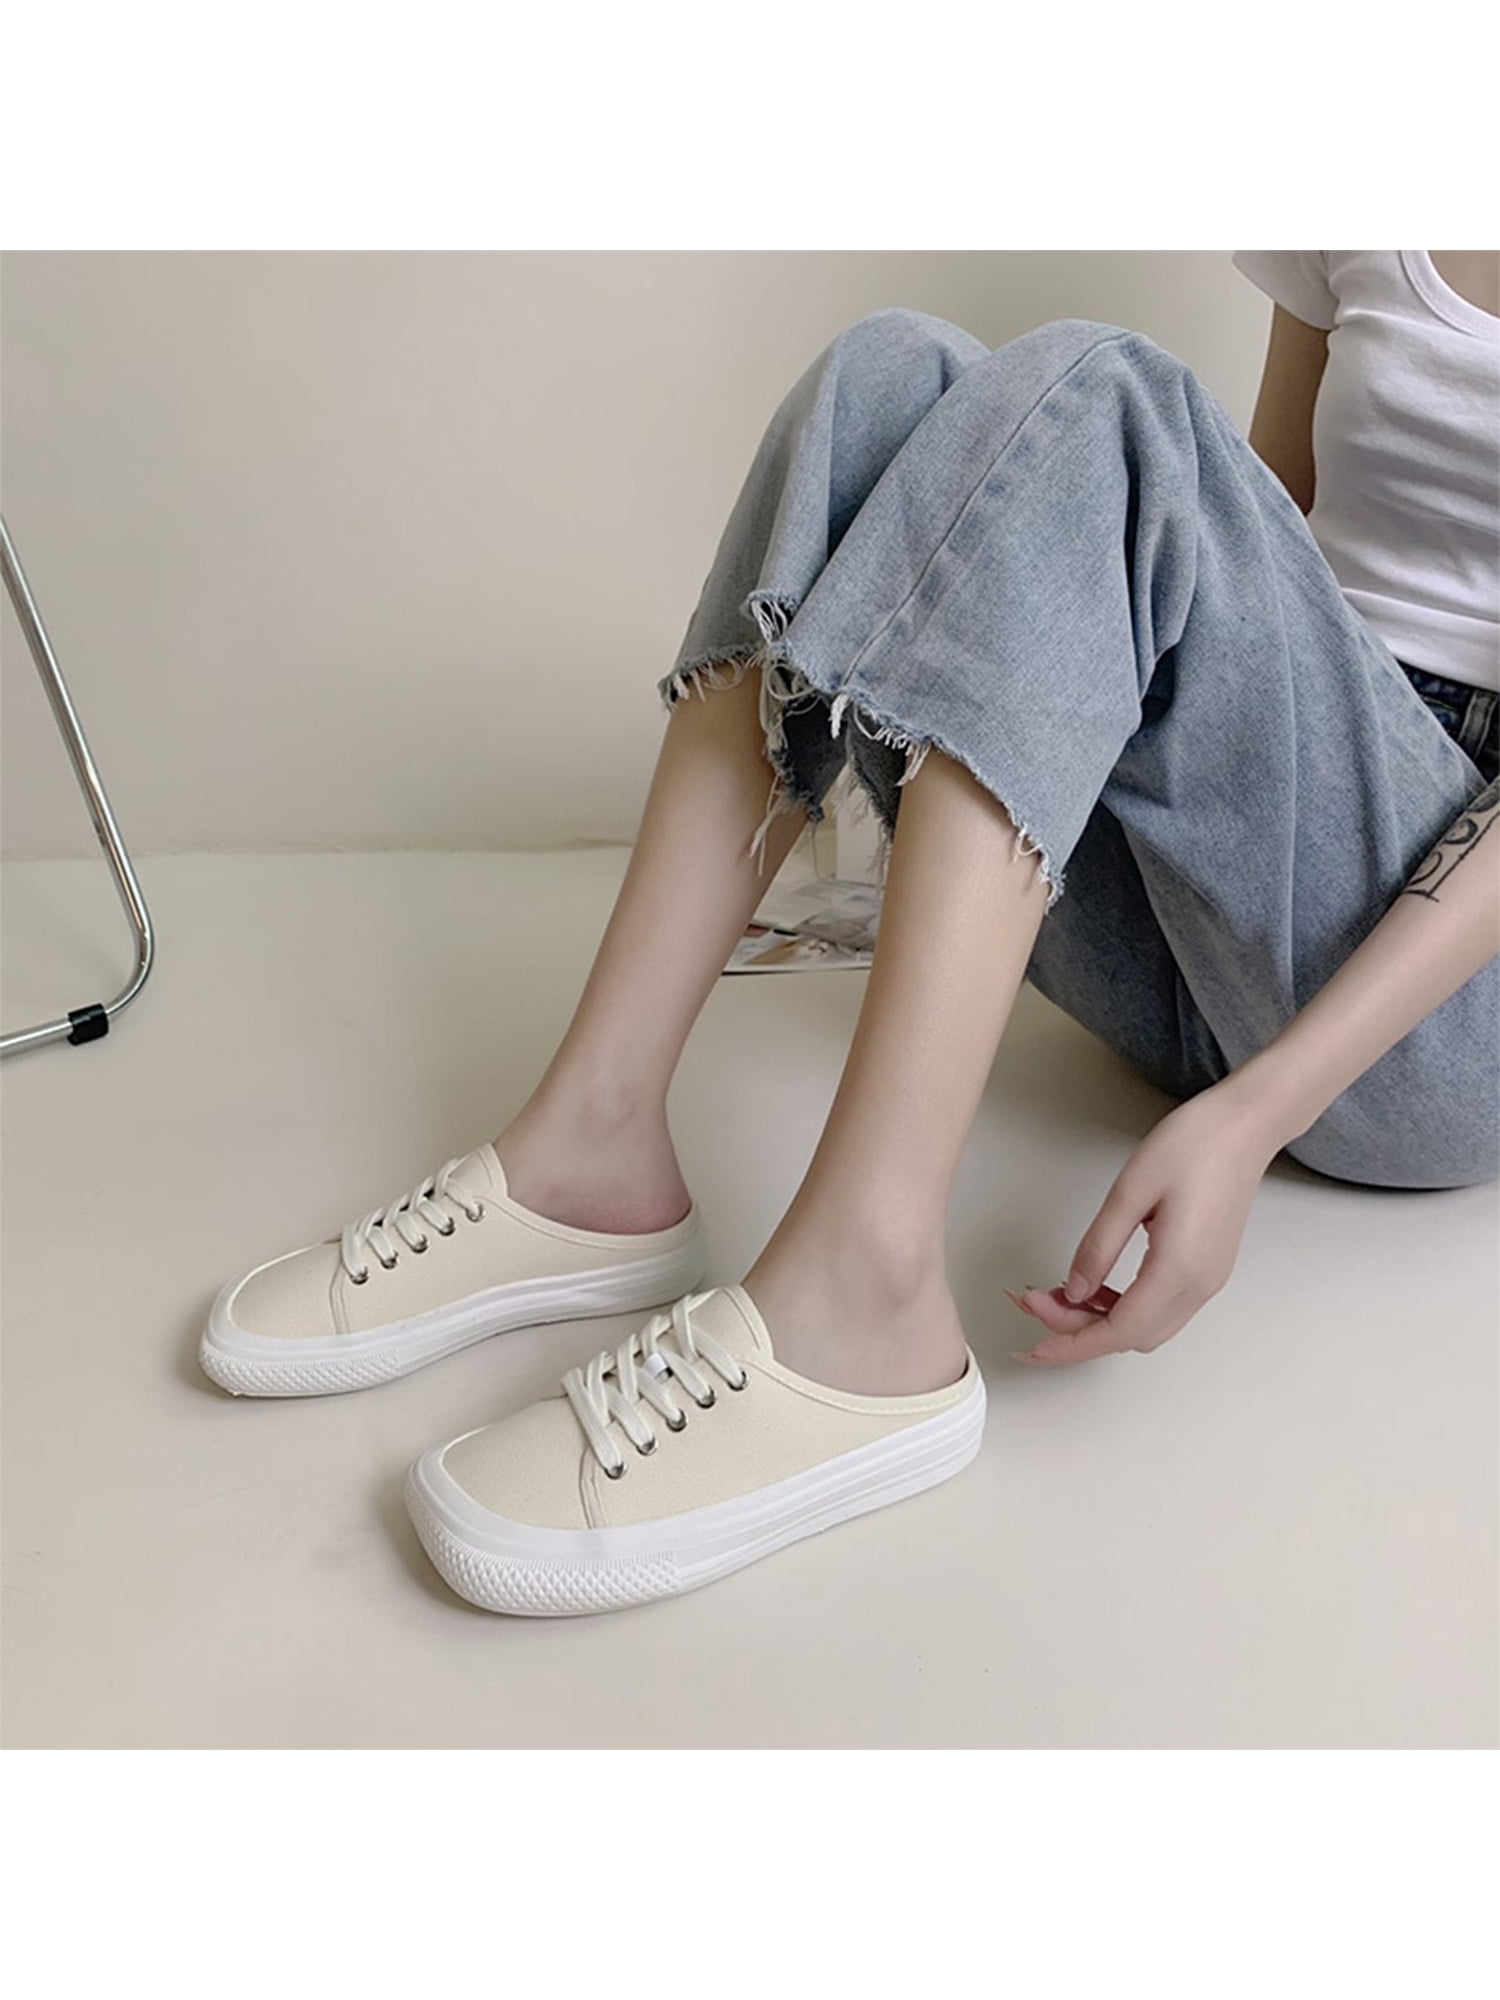 Women's Canvas Platform Shoes Slip On Mules Slippers Low Top Backless Sneakers for Walking 